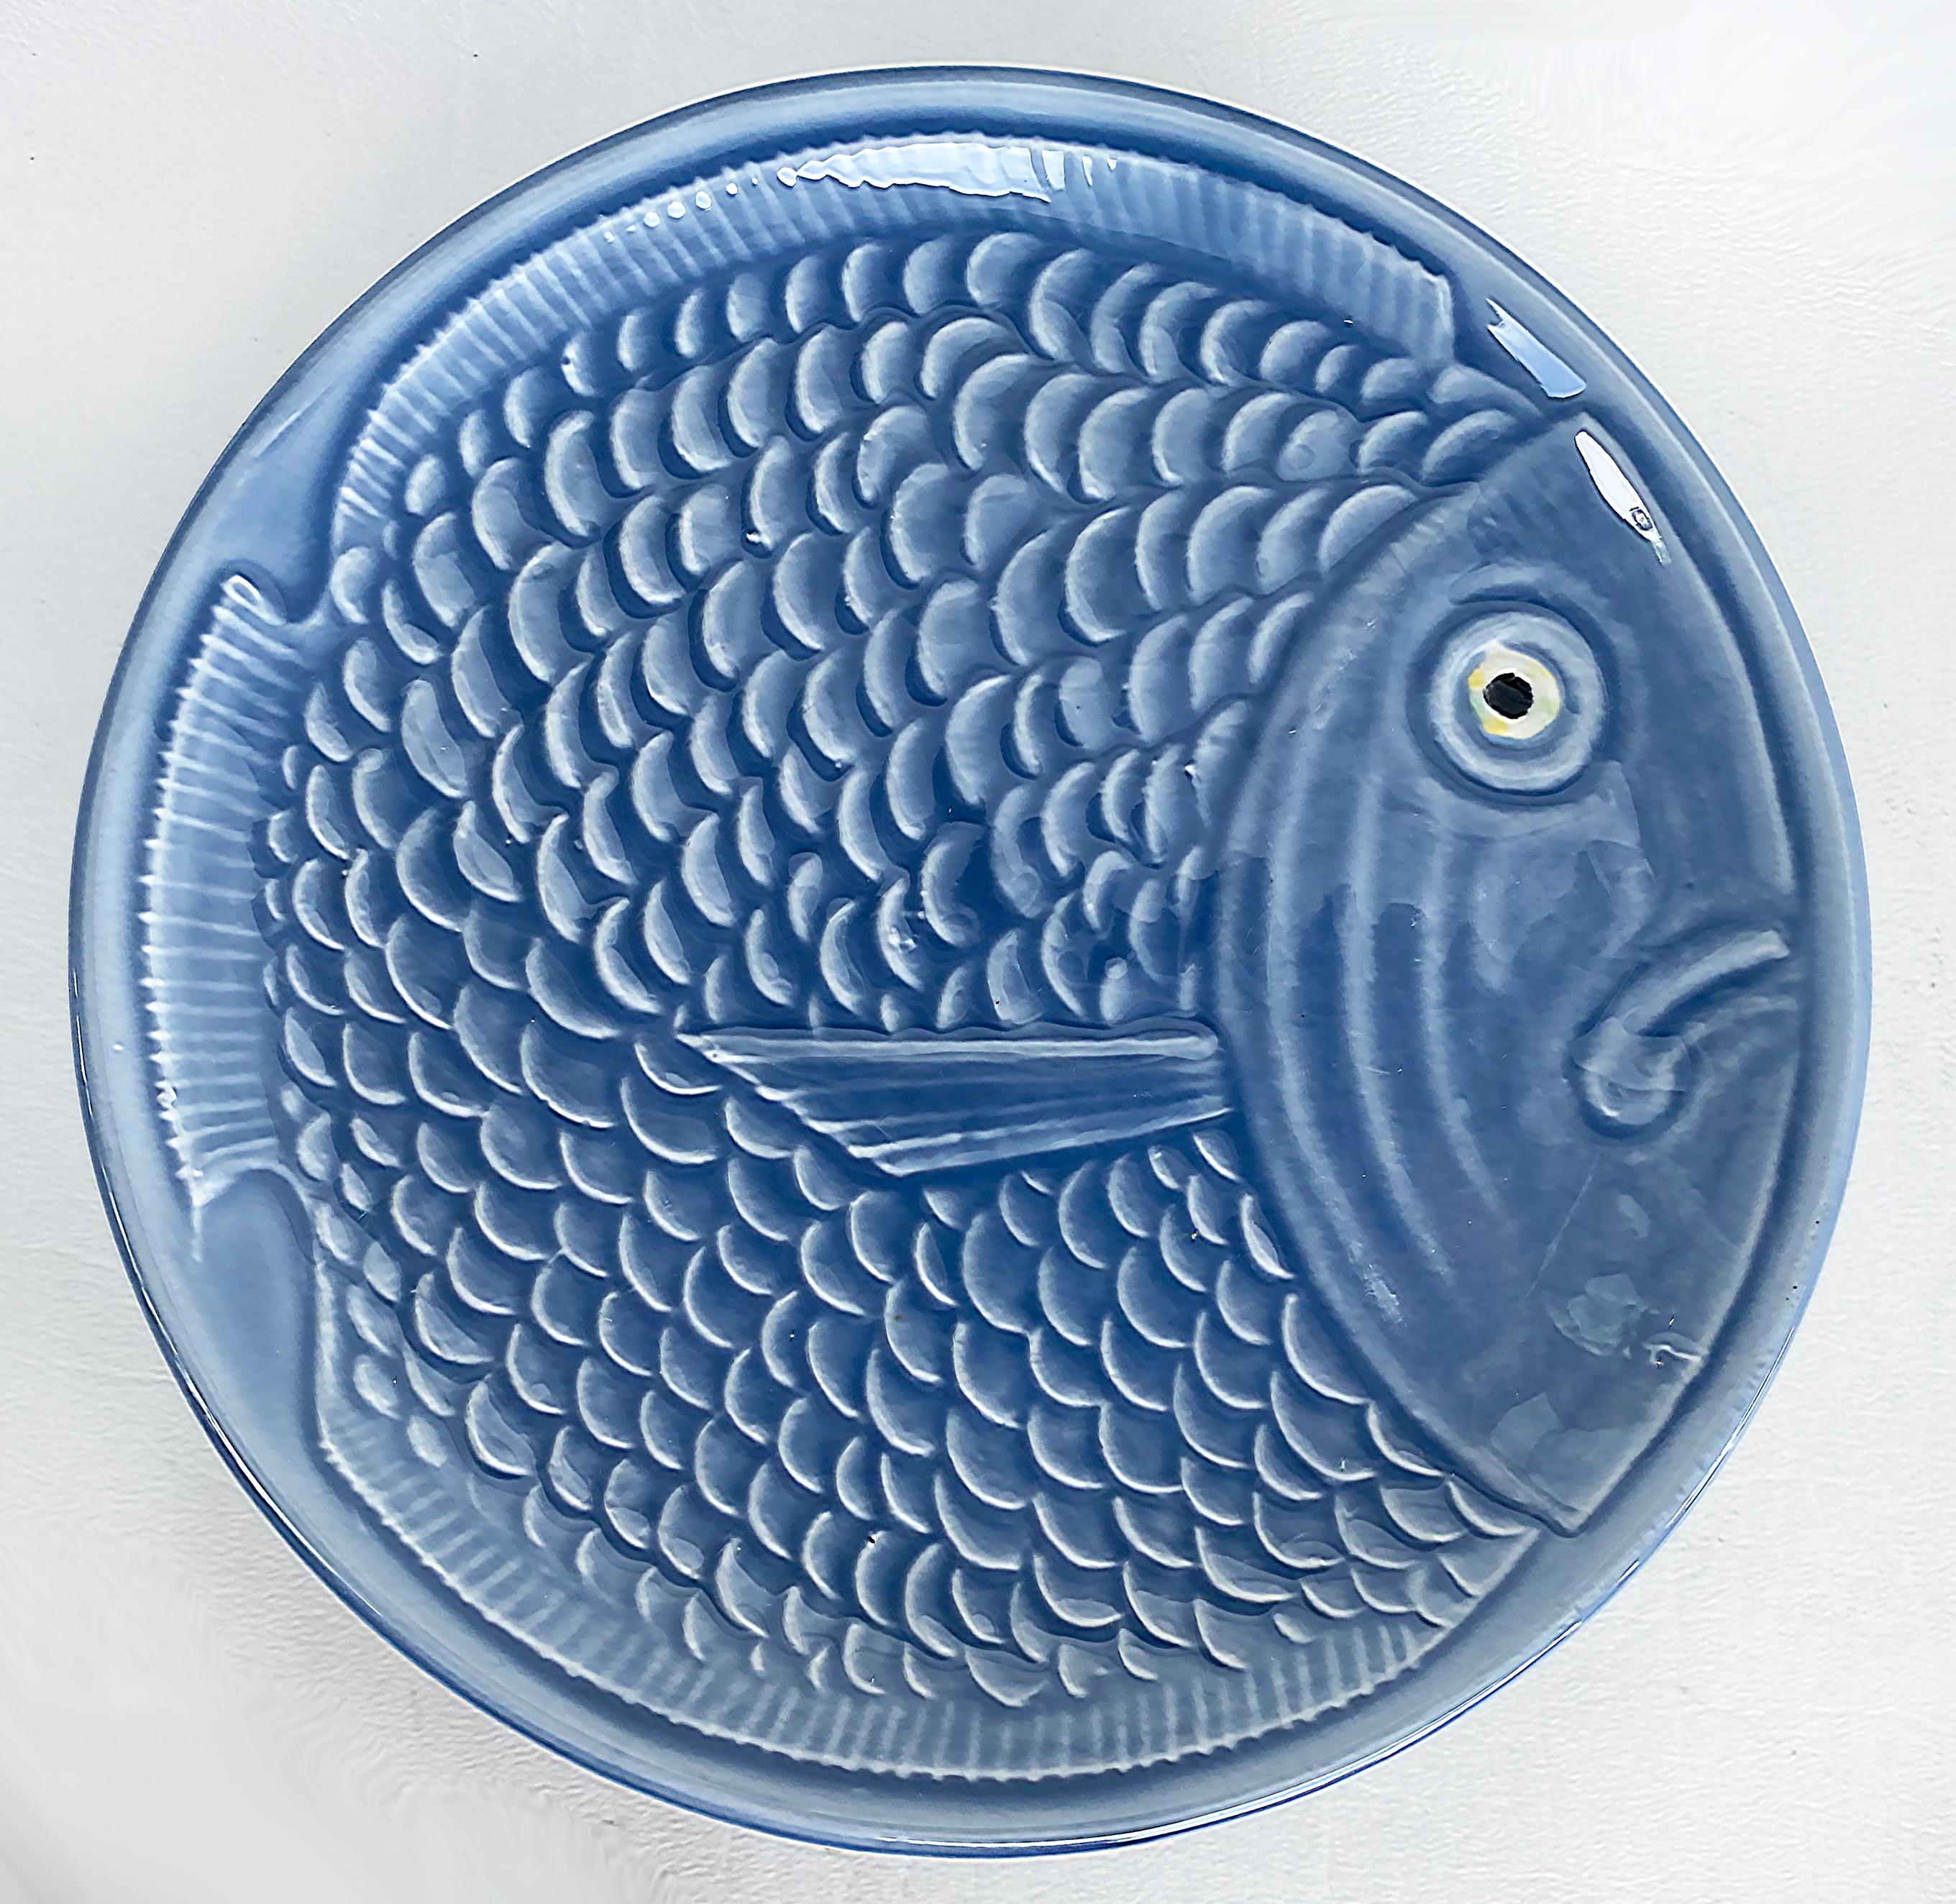 Vintage Secla Portugal Ceramic Round Faience Fish  Plates (set of 10) 

Offered for sale is a set of 10 round Portuguese faience ceramic fish plates from a fresh New York City estate. The plates are marked on the backs and have fish scale textures